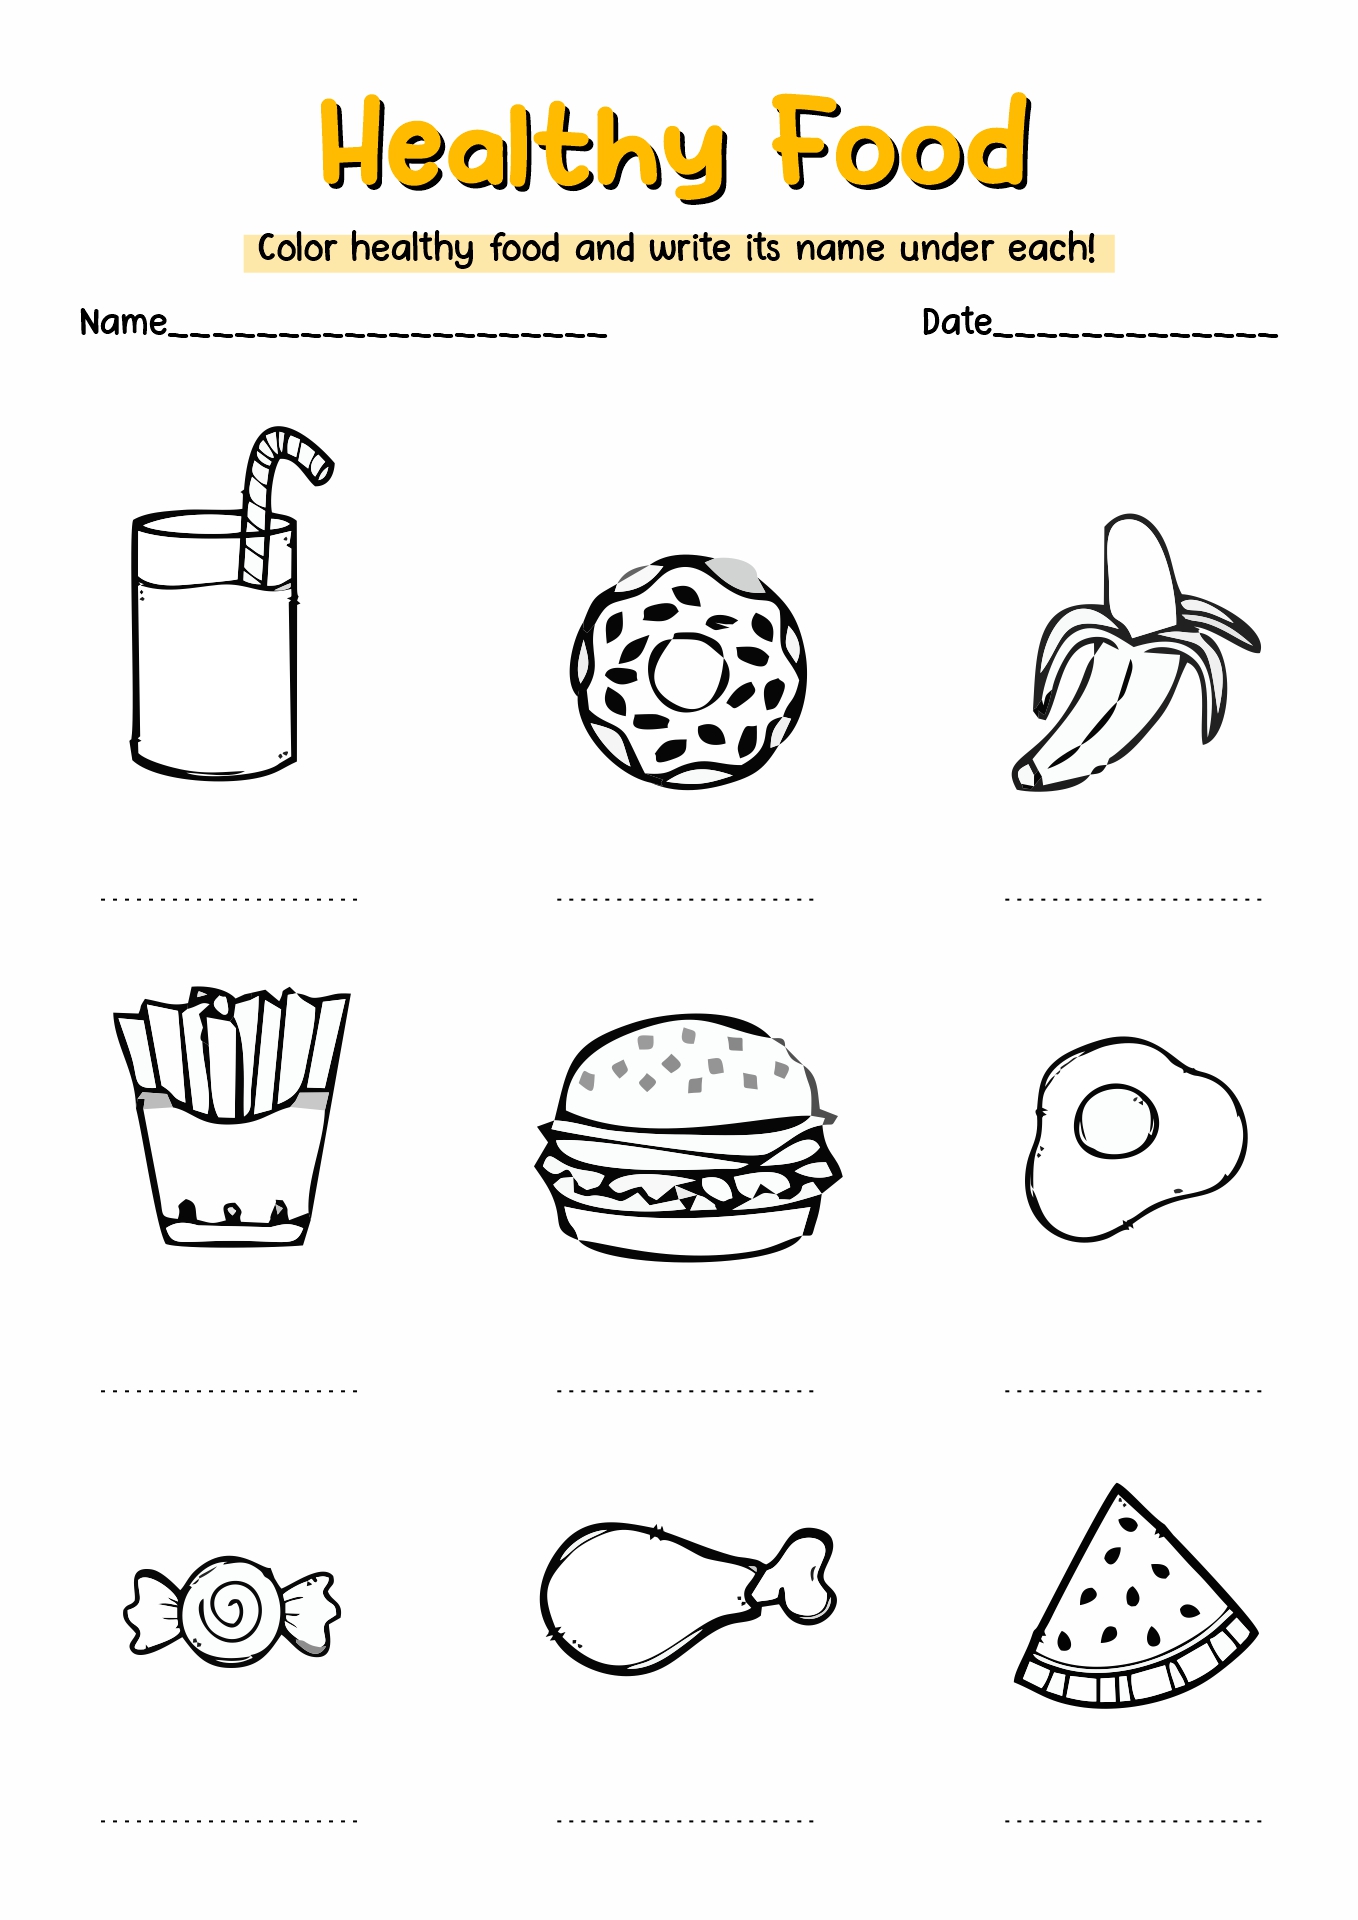 Healthy Foods Activity Sheets